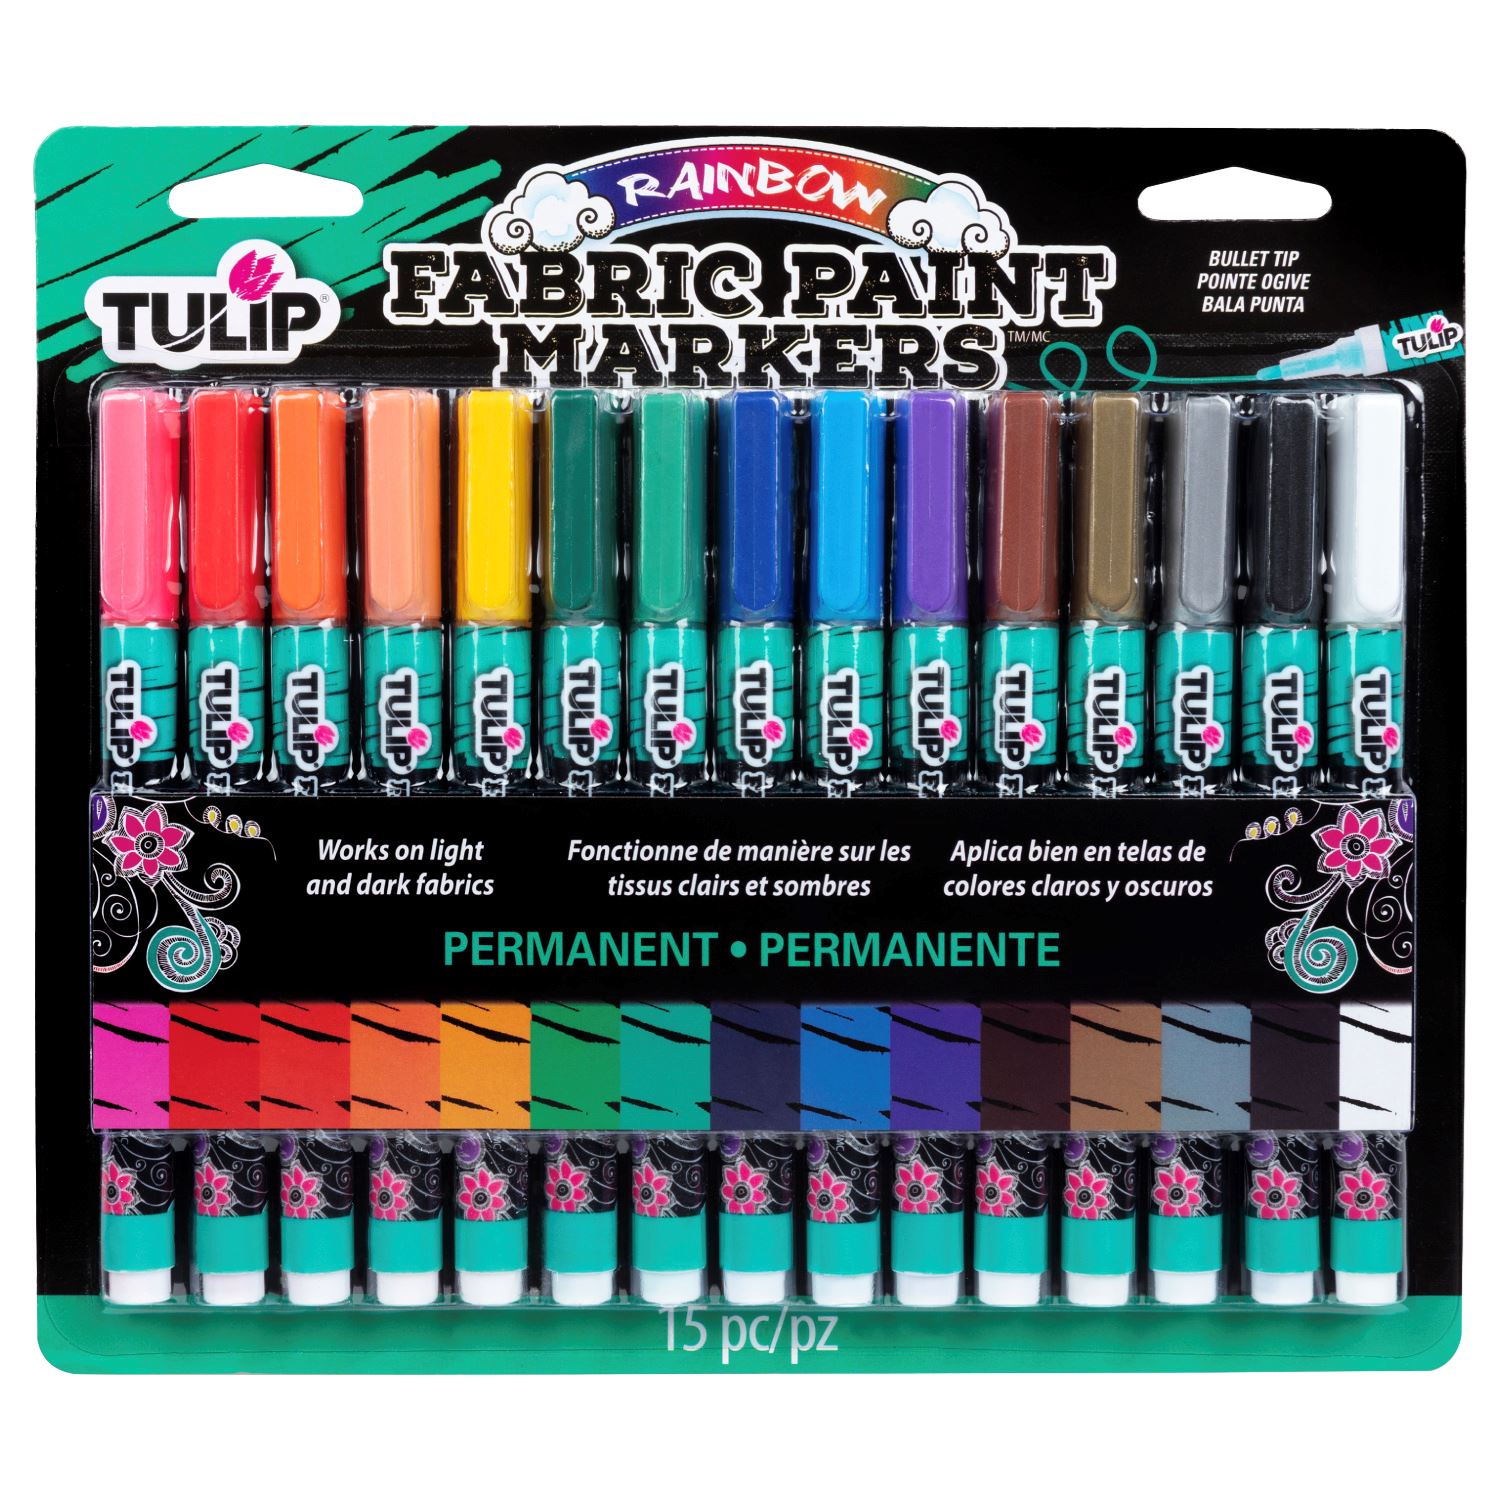 https://shop.ilovetocreate.com/images/thumbs/0018615_tulip-bullet-tip-fabric-paint-markers-rainbow-15-pack.jpeg